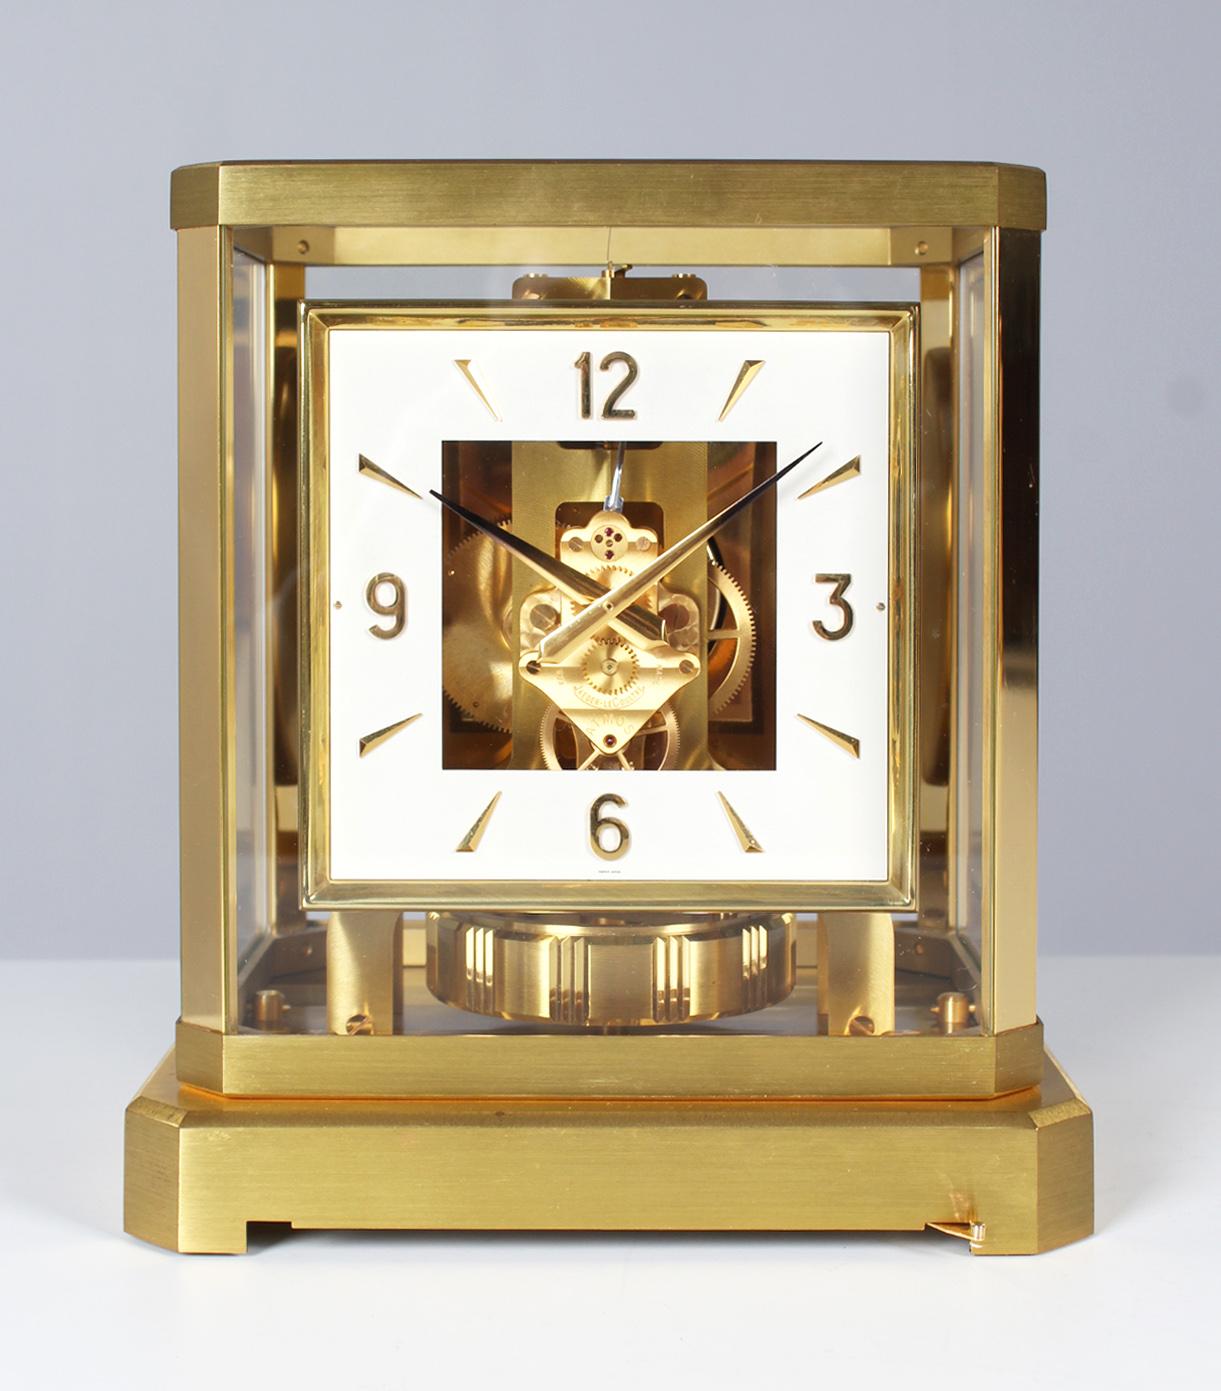 Atmos clock from Jaeger LeCoultre, year of manufacture 1962 with square dial

Switzerland
Brass gold plated
year of manufacture 1962

Dimensions: H x W x D: 23 x 21 x 16 cm

Description:
Atmos VI in matte brushed gold plated case with